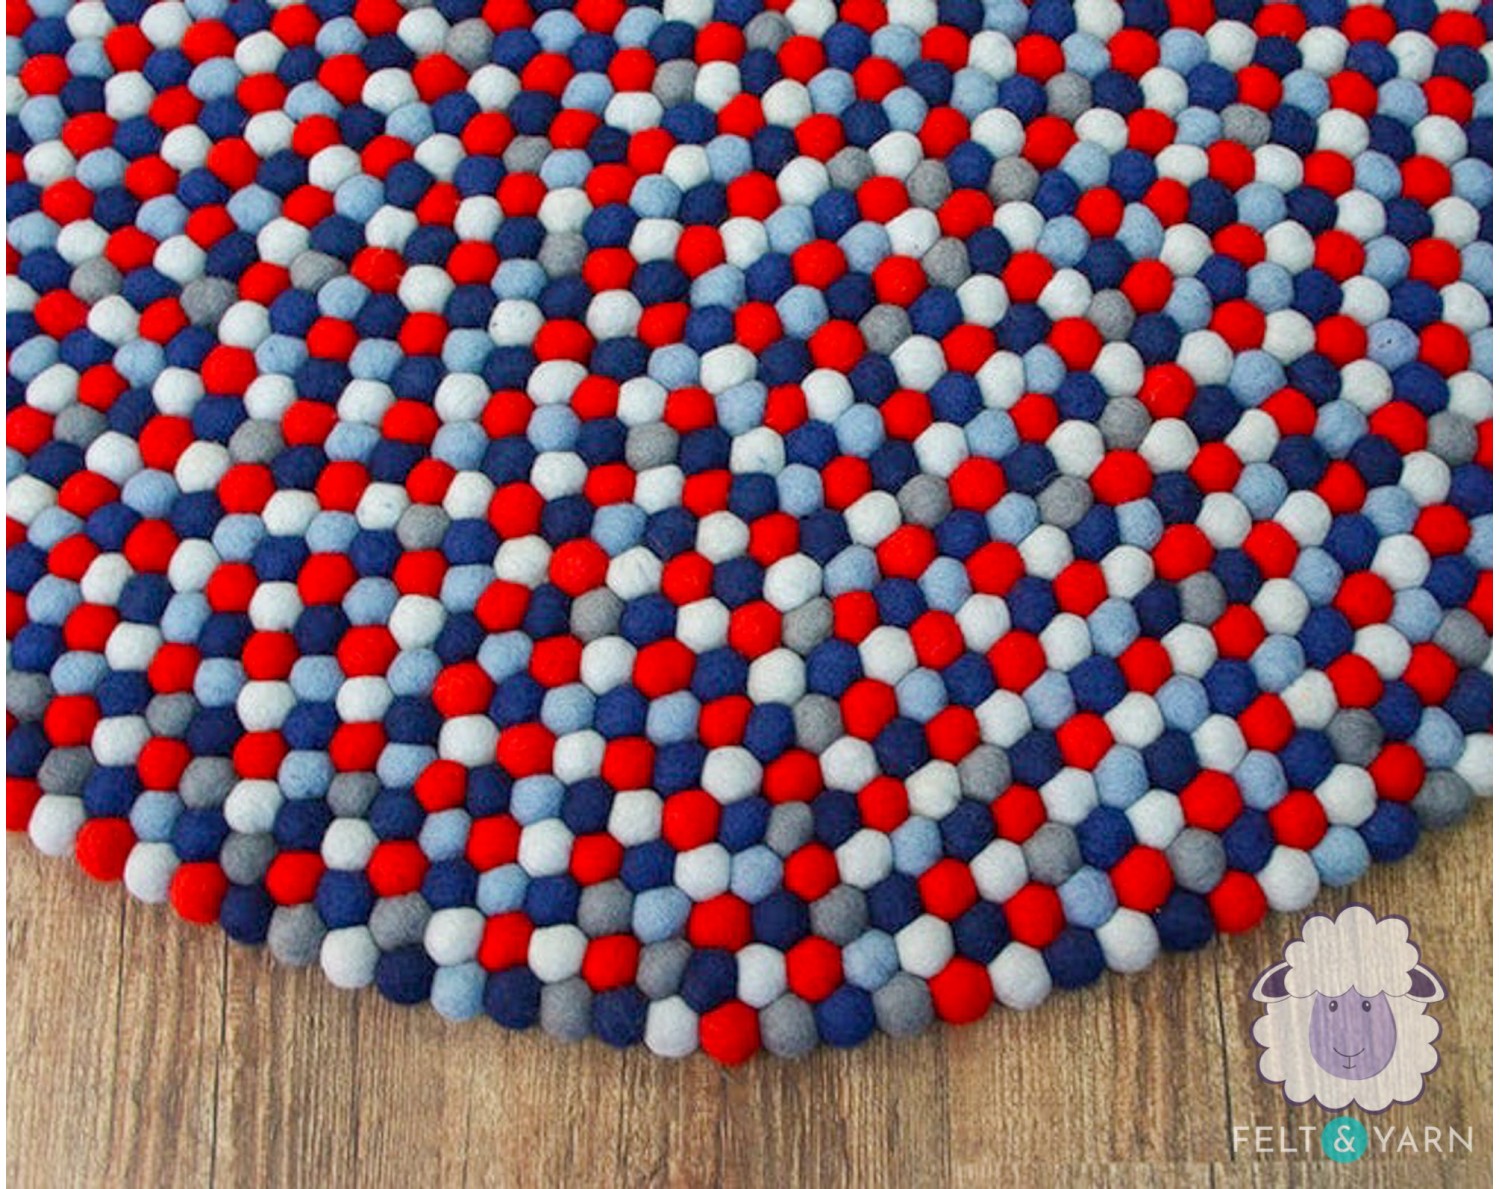 Red and Blue Multi-color Felt Ball Rug